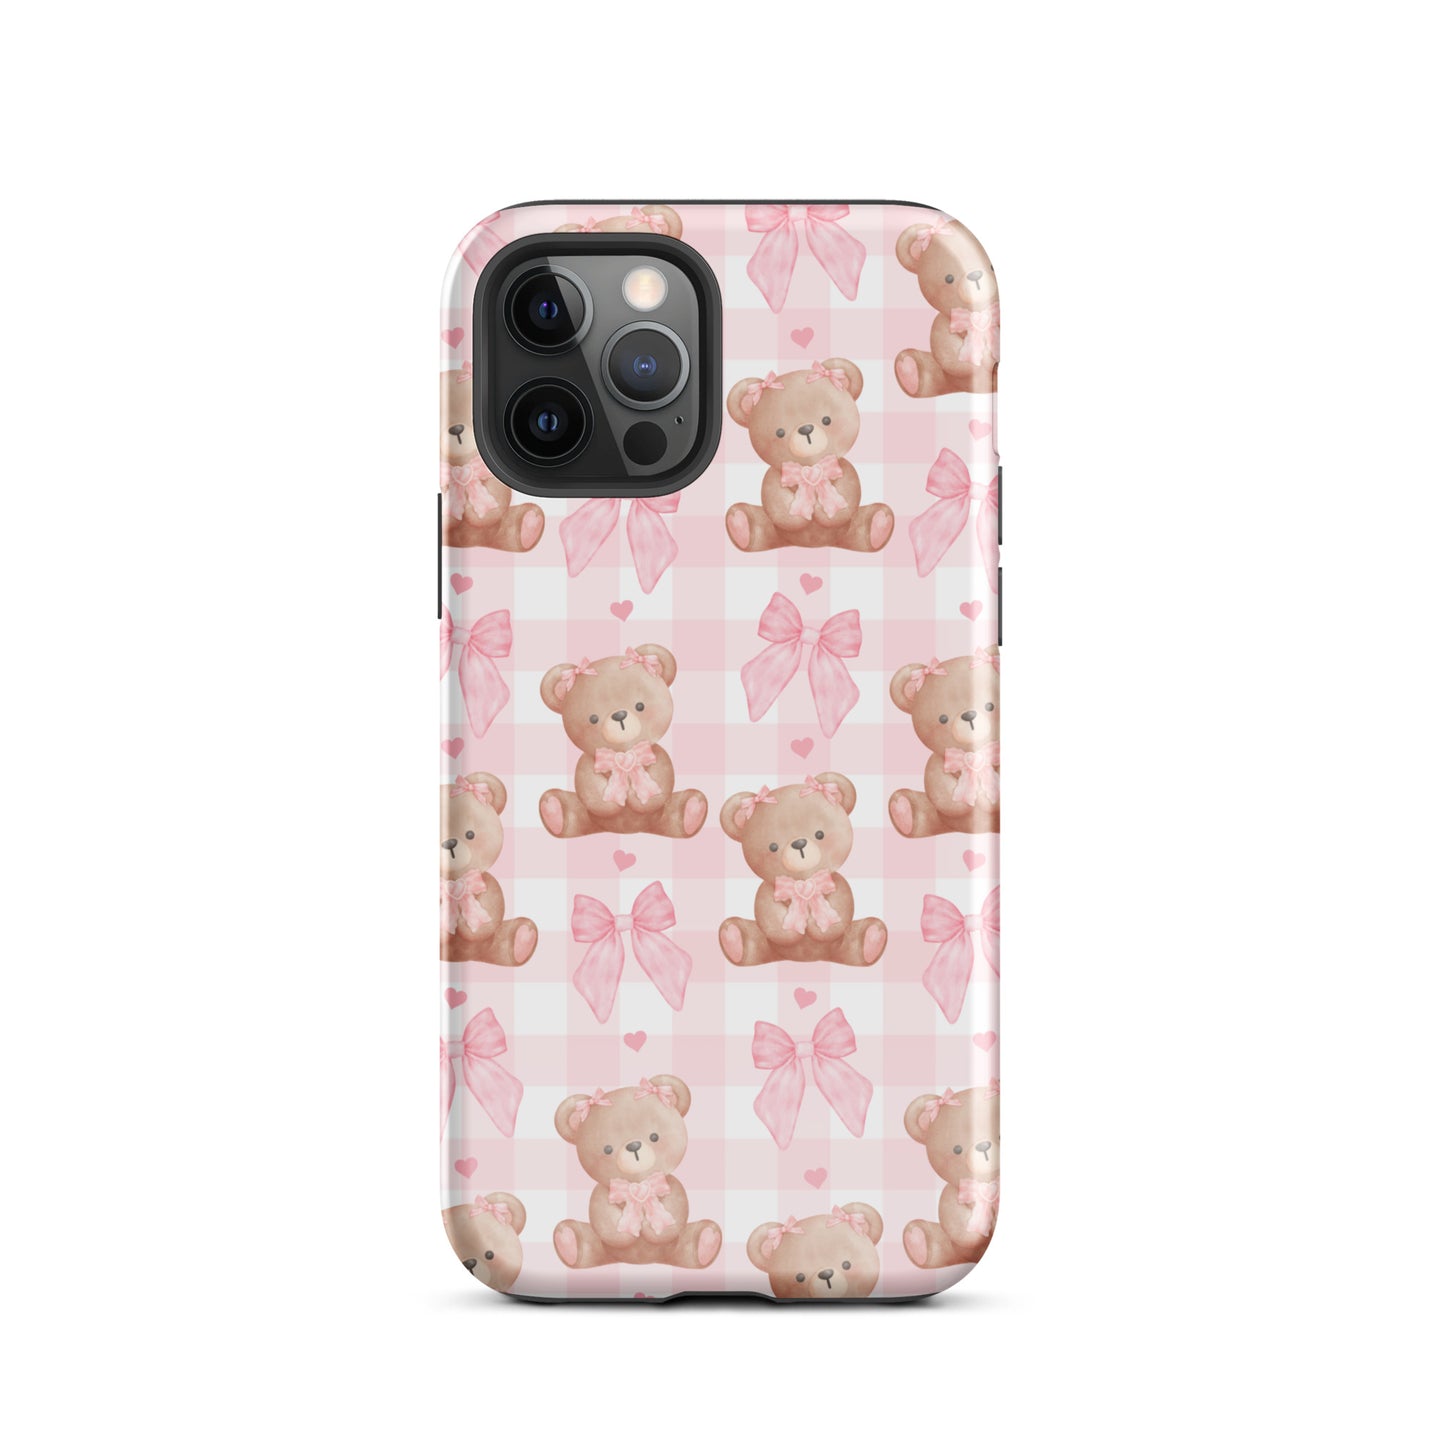 Bows & Bears iPhone Case